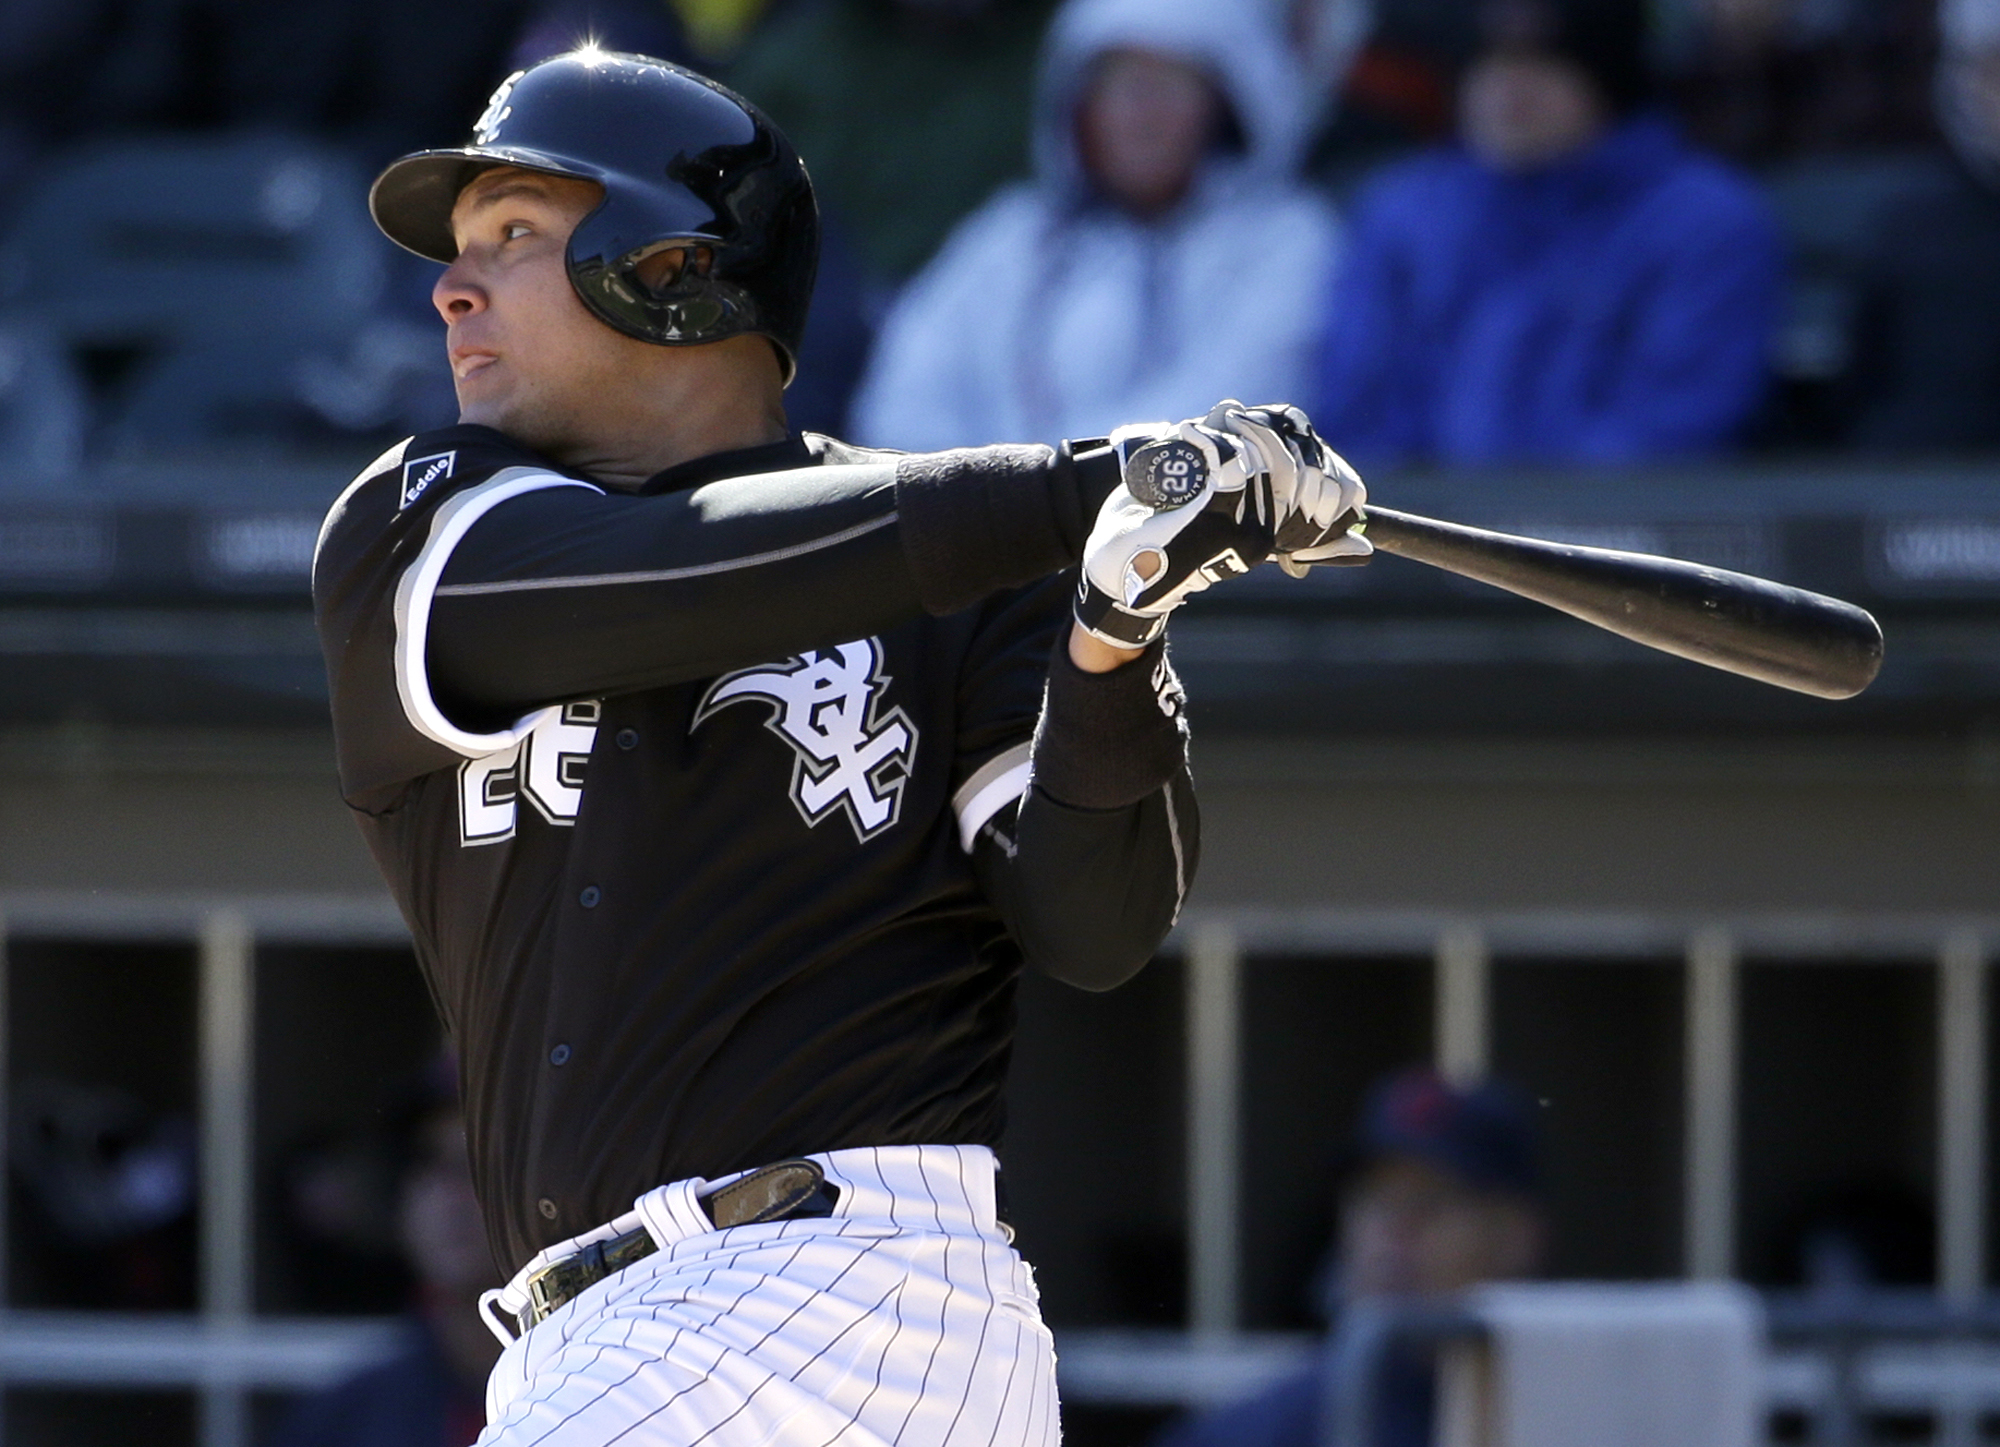 WHITE SOX AGREE TO TERMS WITH AVISAIL GARCIA AND BRETT LAWRIE